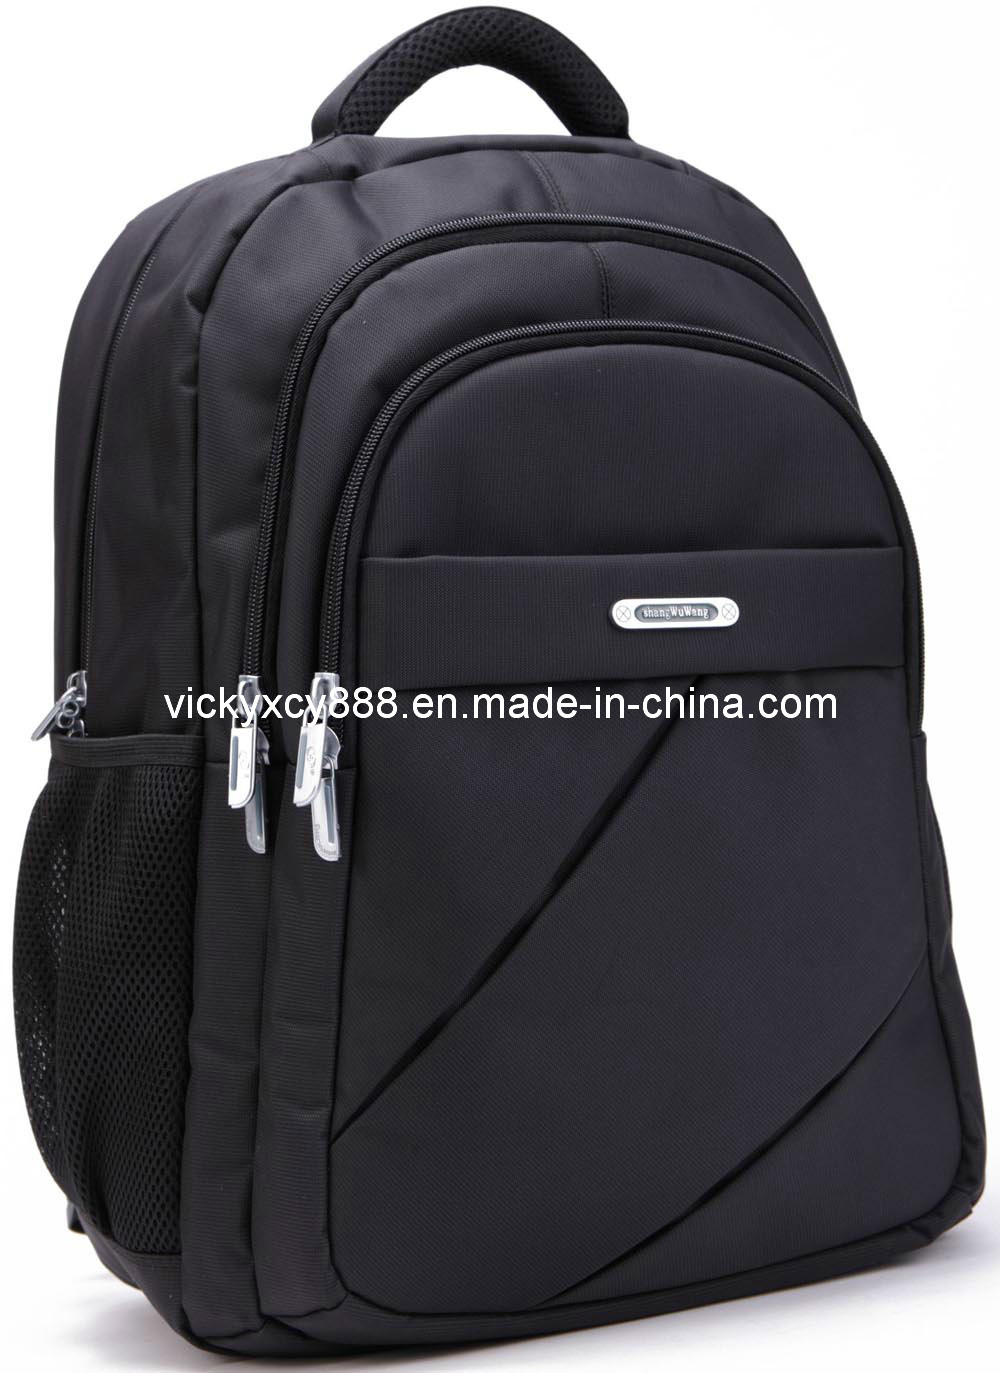 Lapotp Notebook Travel Computer Backpack Bag Case Pack (CY9840)